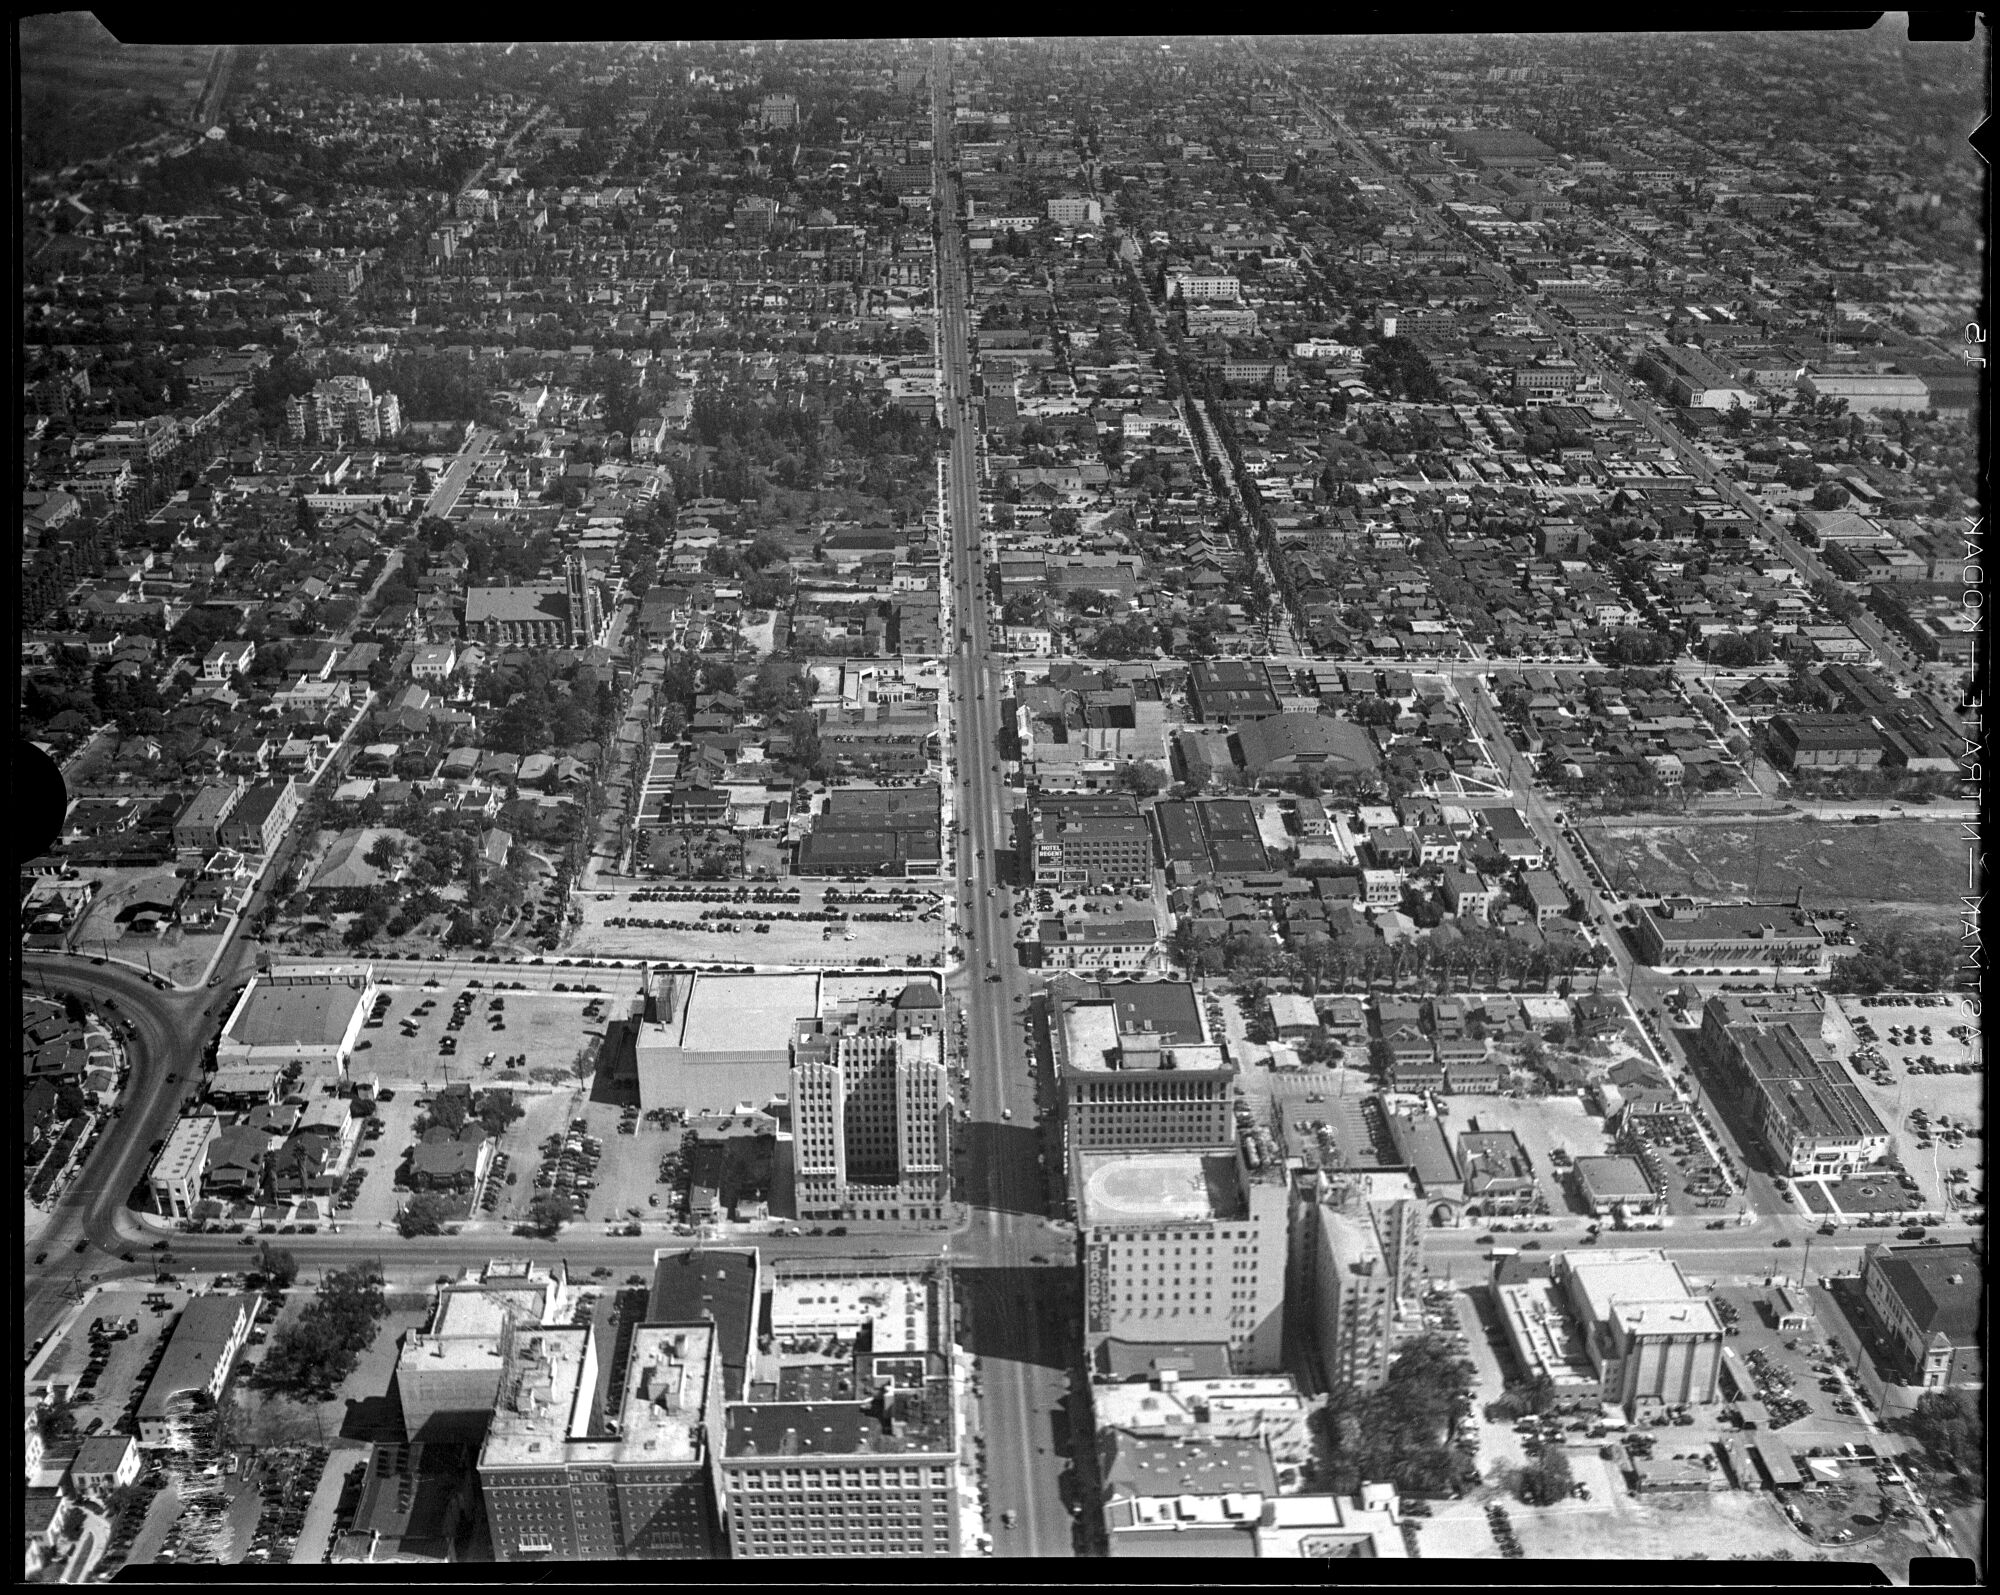 A view of Los Angeles, photographed sometime between 1920 and 1935, shows urban sprawl taking shape.